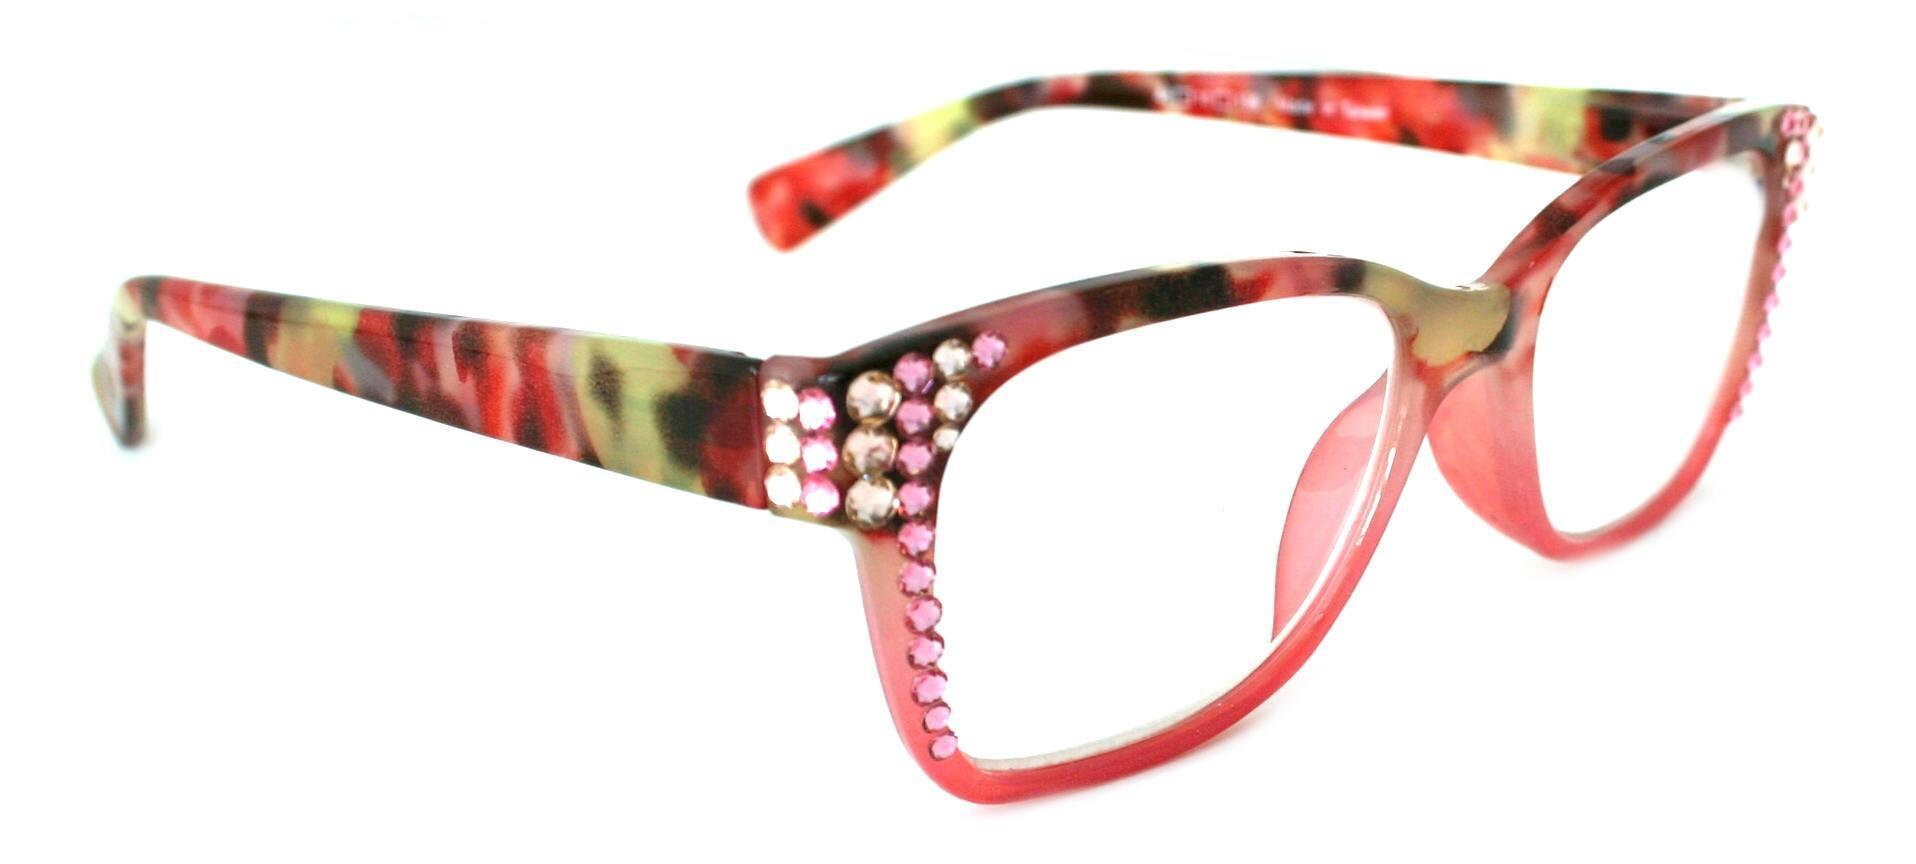 Women's High-Powered Reading Glasses: Red and Pink Frame and Matching Case  +4.00 Magnification Aspheric Lenses